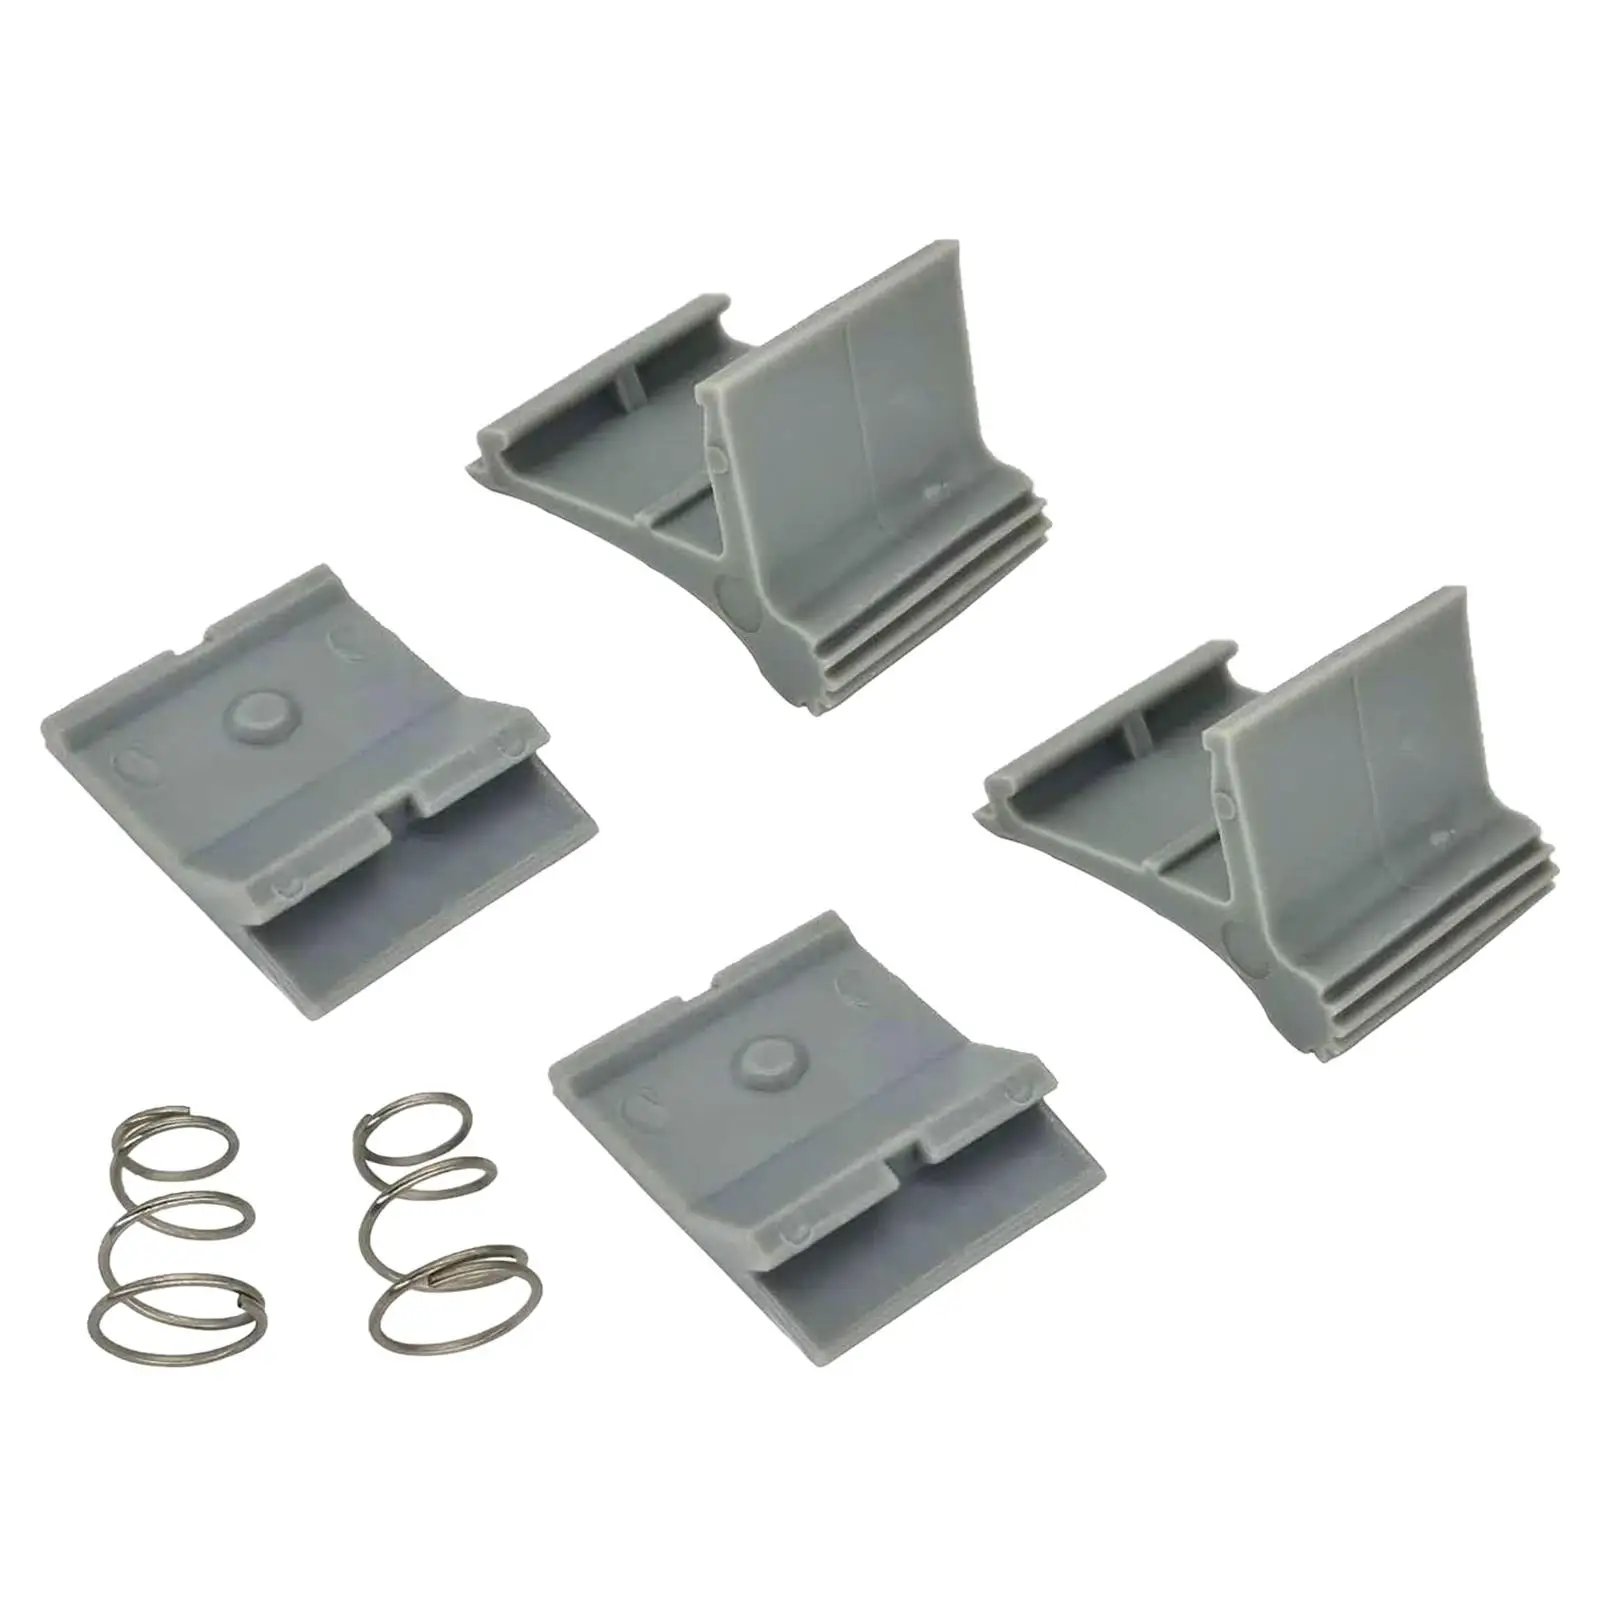 RV Awning Arm Slider Catch Set Repair Parts Durable Assembly Accessory Easy